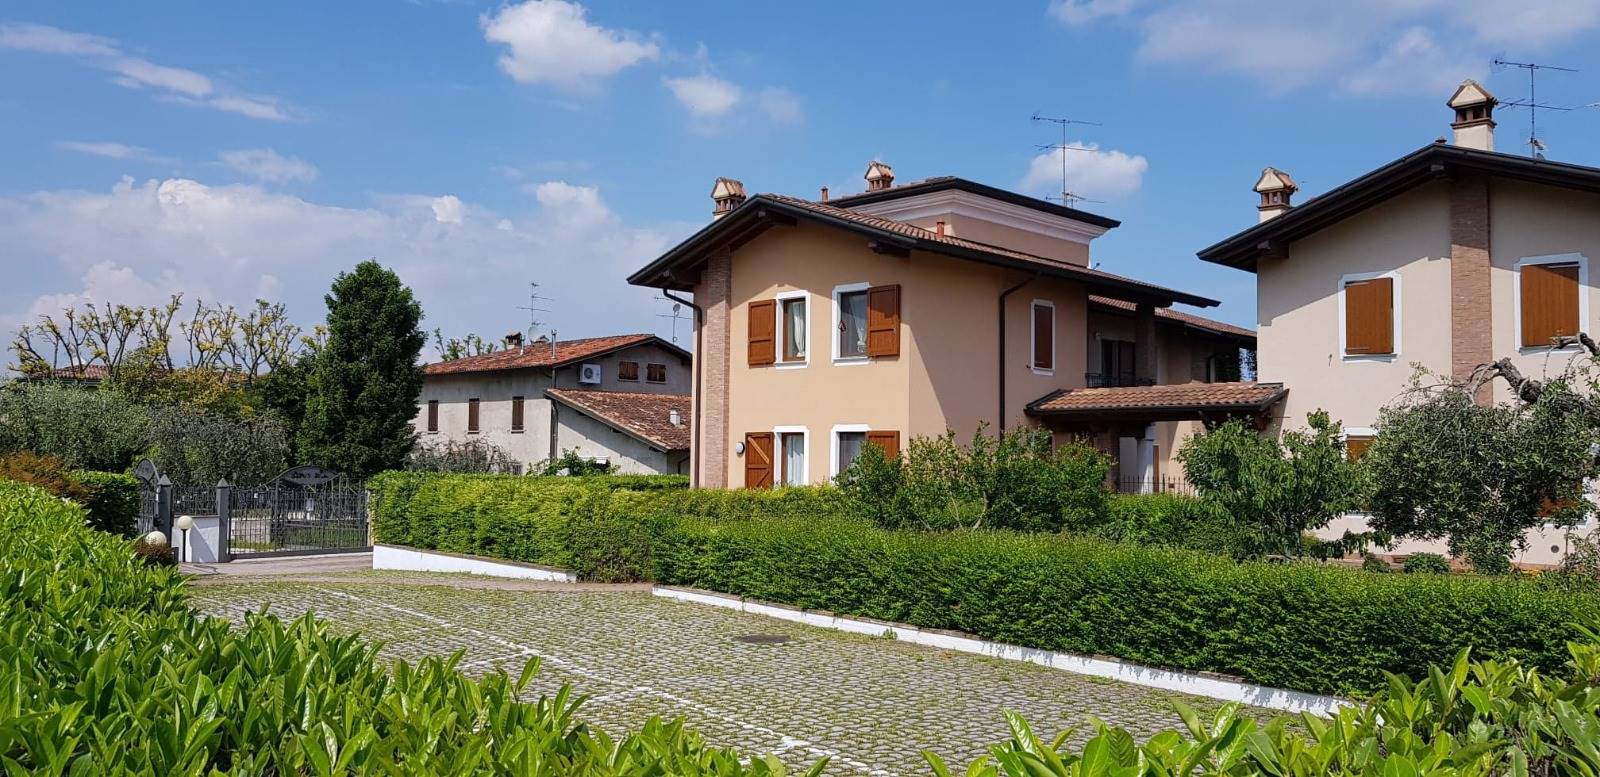 BARCUZZI, LONATO, Apartment for sale of 380 Sq. mt., Excellent Condition, Heating Individual heating system, Energetic class: F, placed at Ground, 